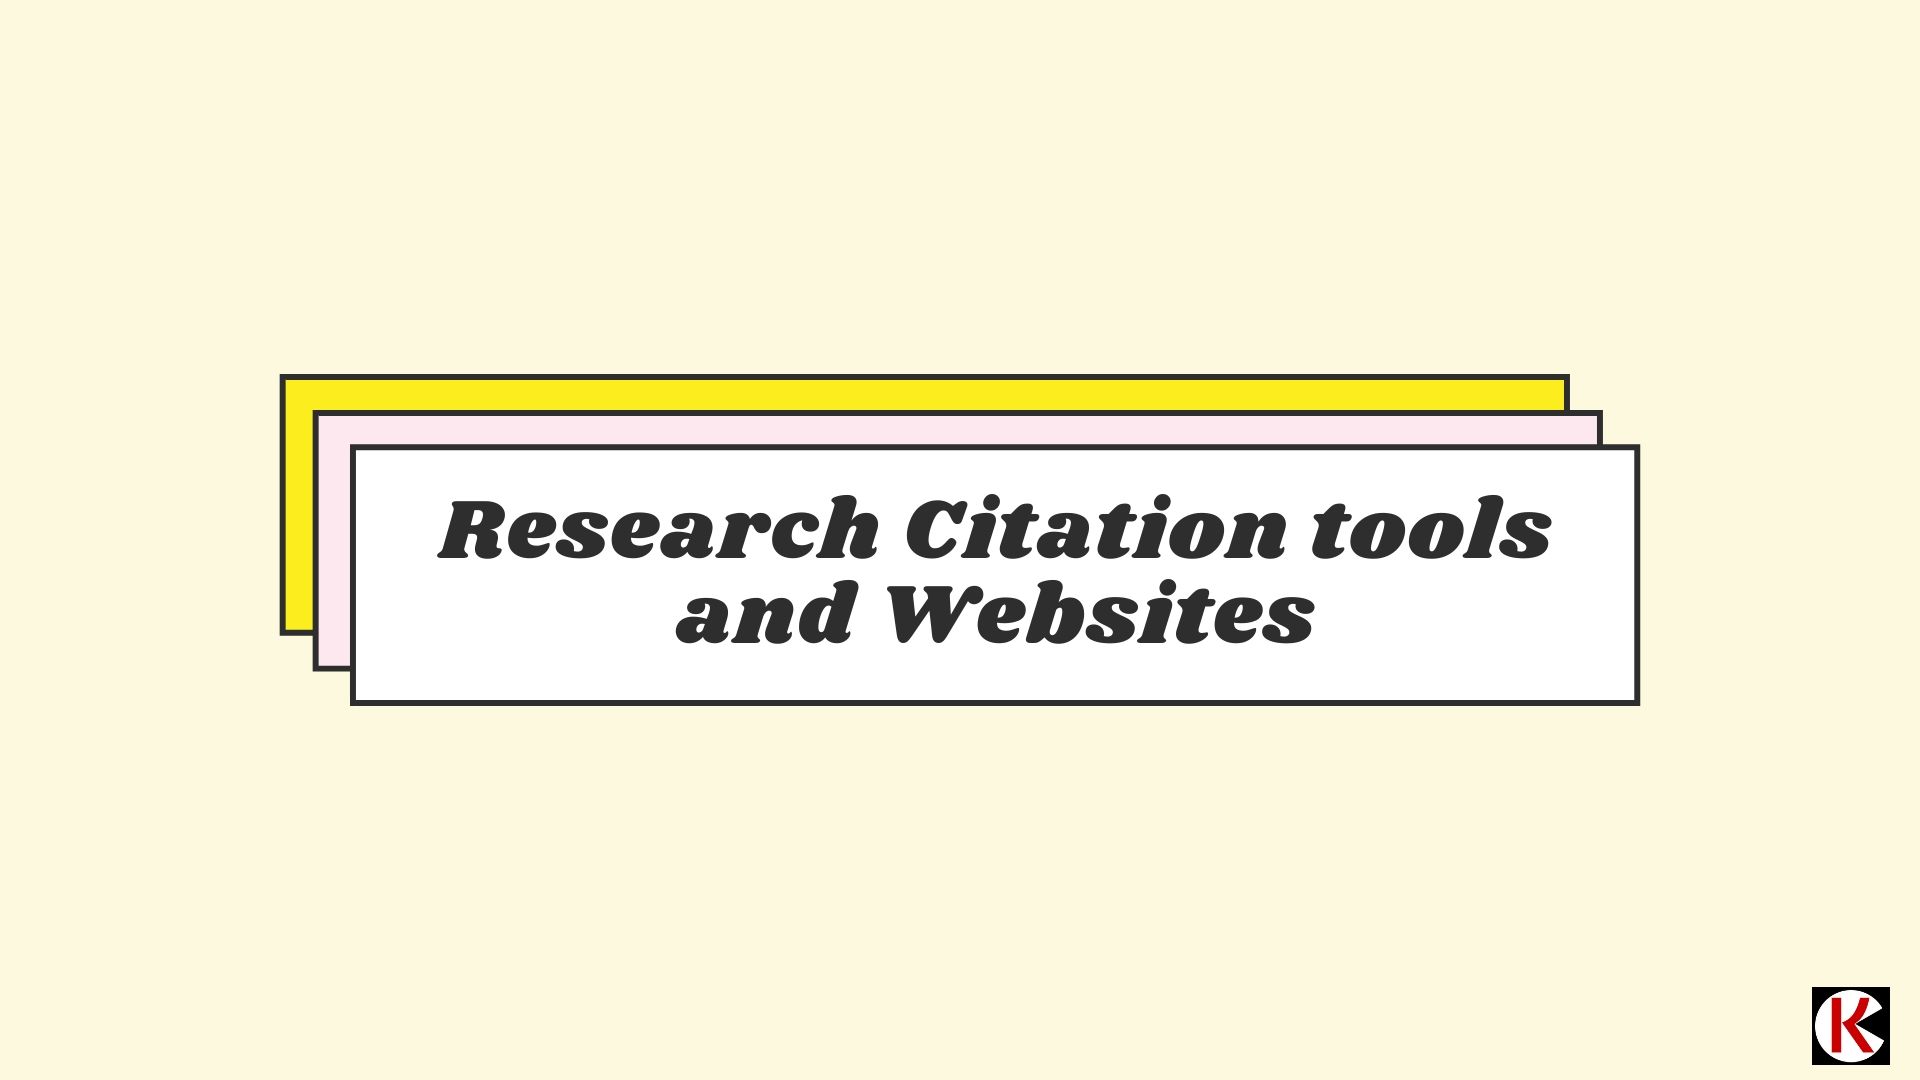 Best Research Citation websites and tools